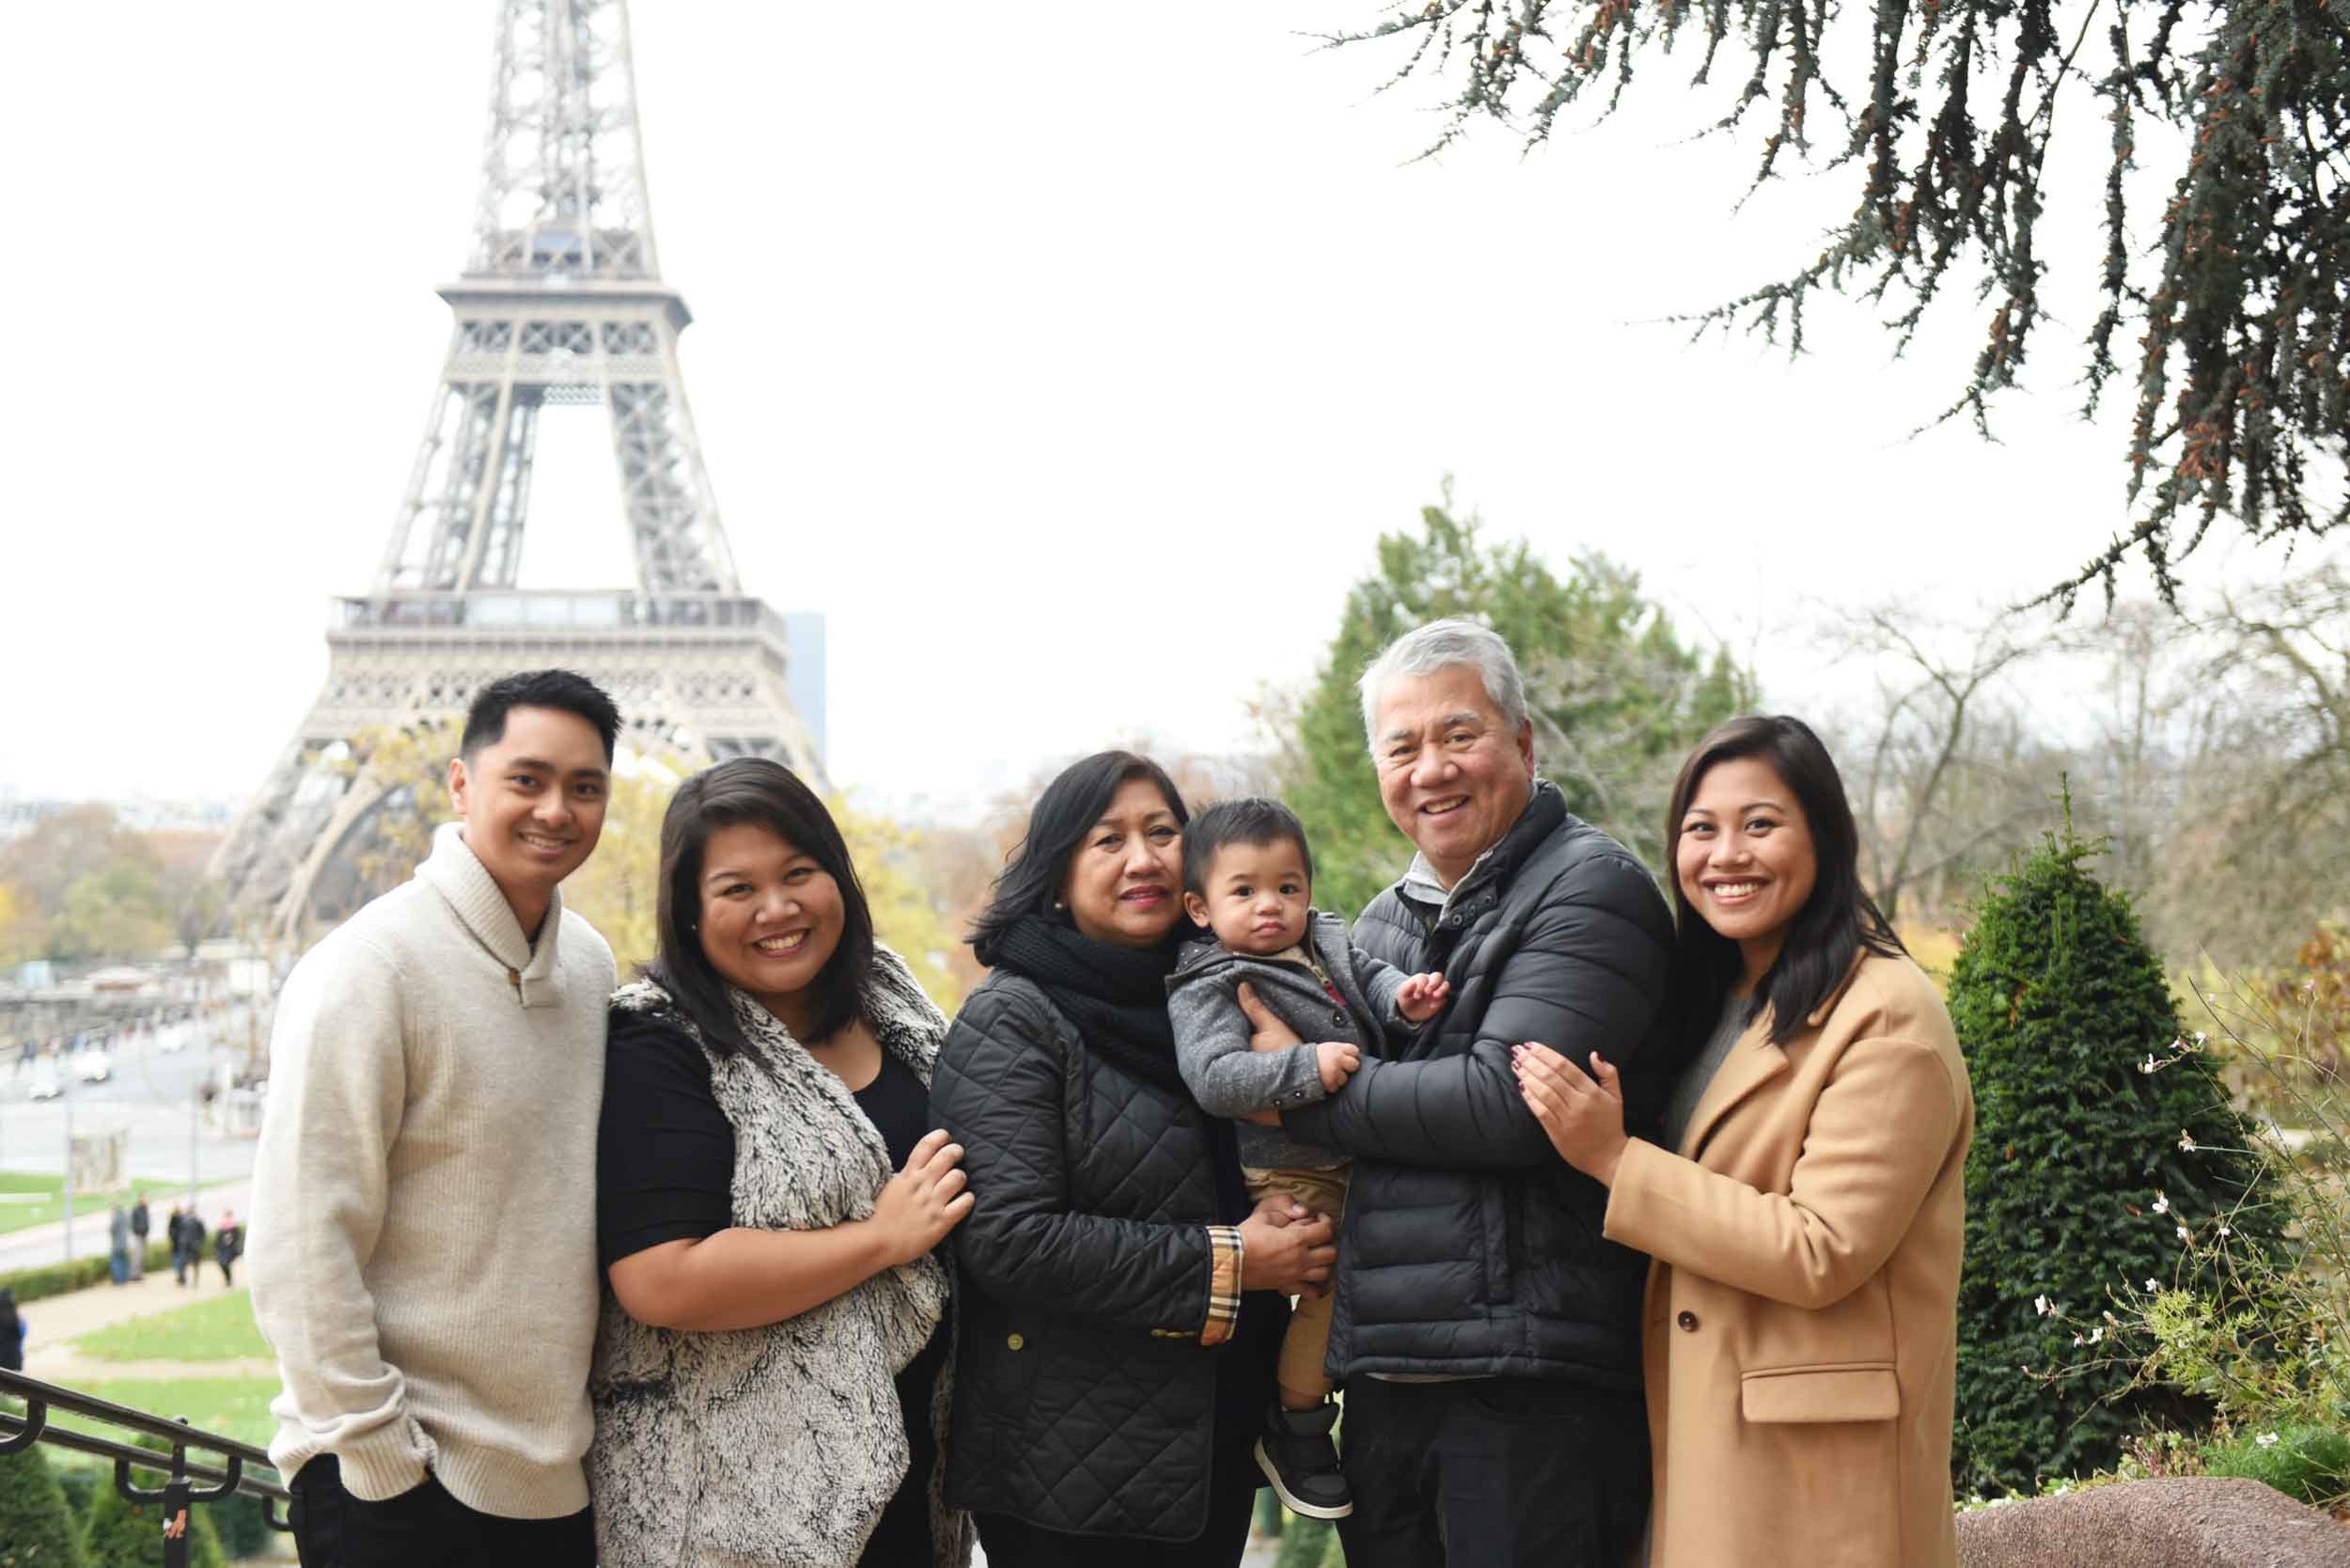  The Ilagan-Lingasin family in Paris, France in 2018. From left: Ryan, Pia, Ana, Noah, Wally, and Abby.  